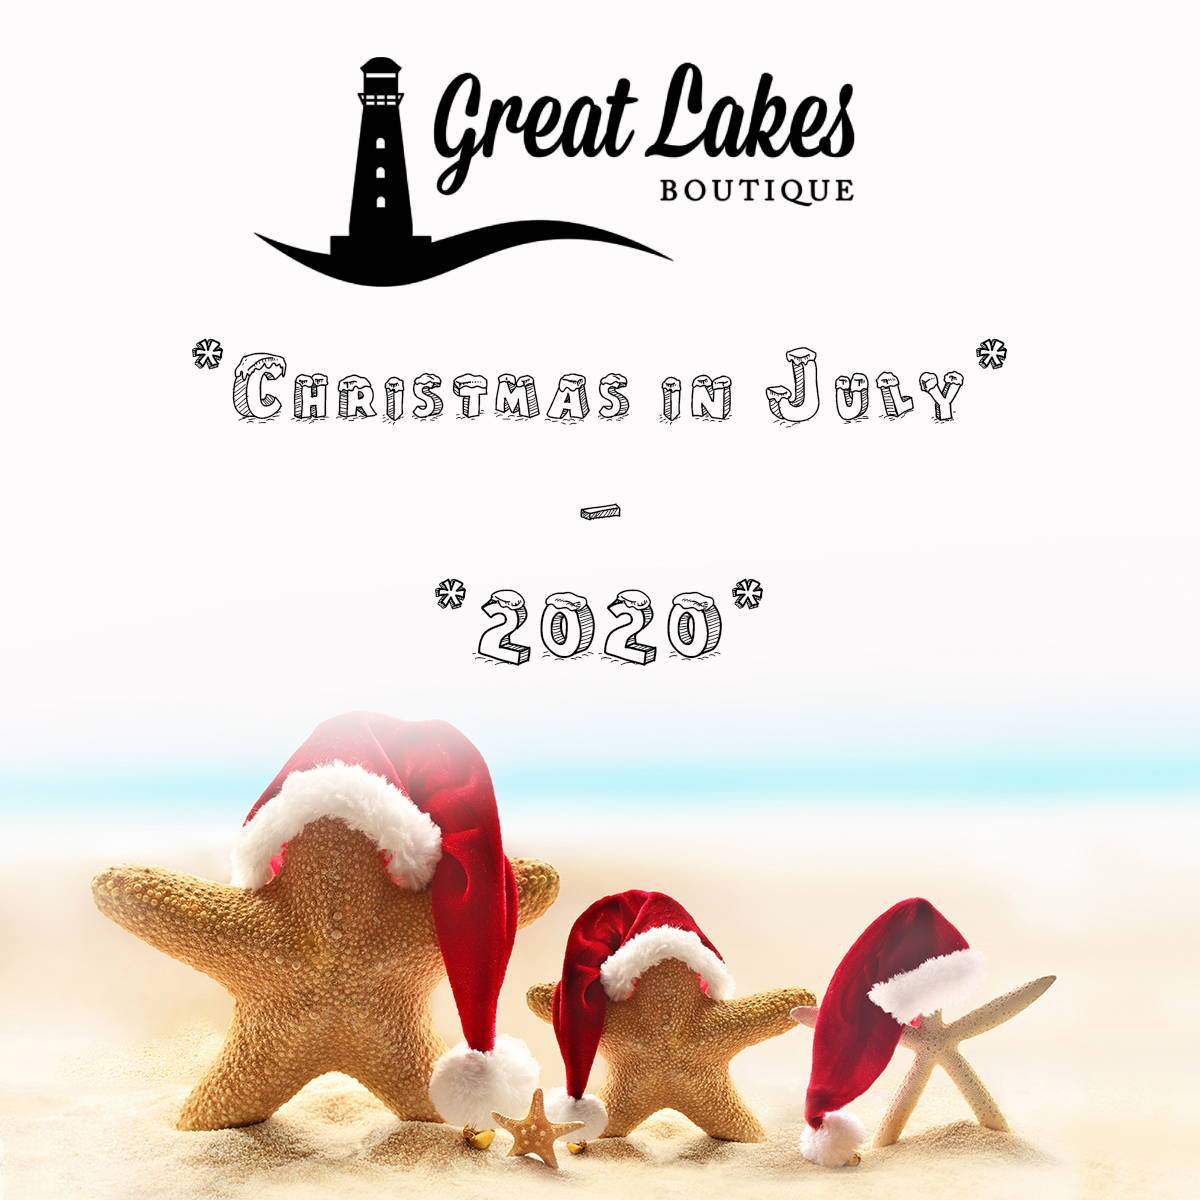 Great Lakes Boutique Christmas in July Begins